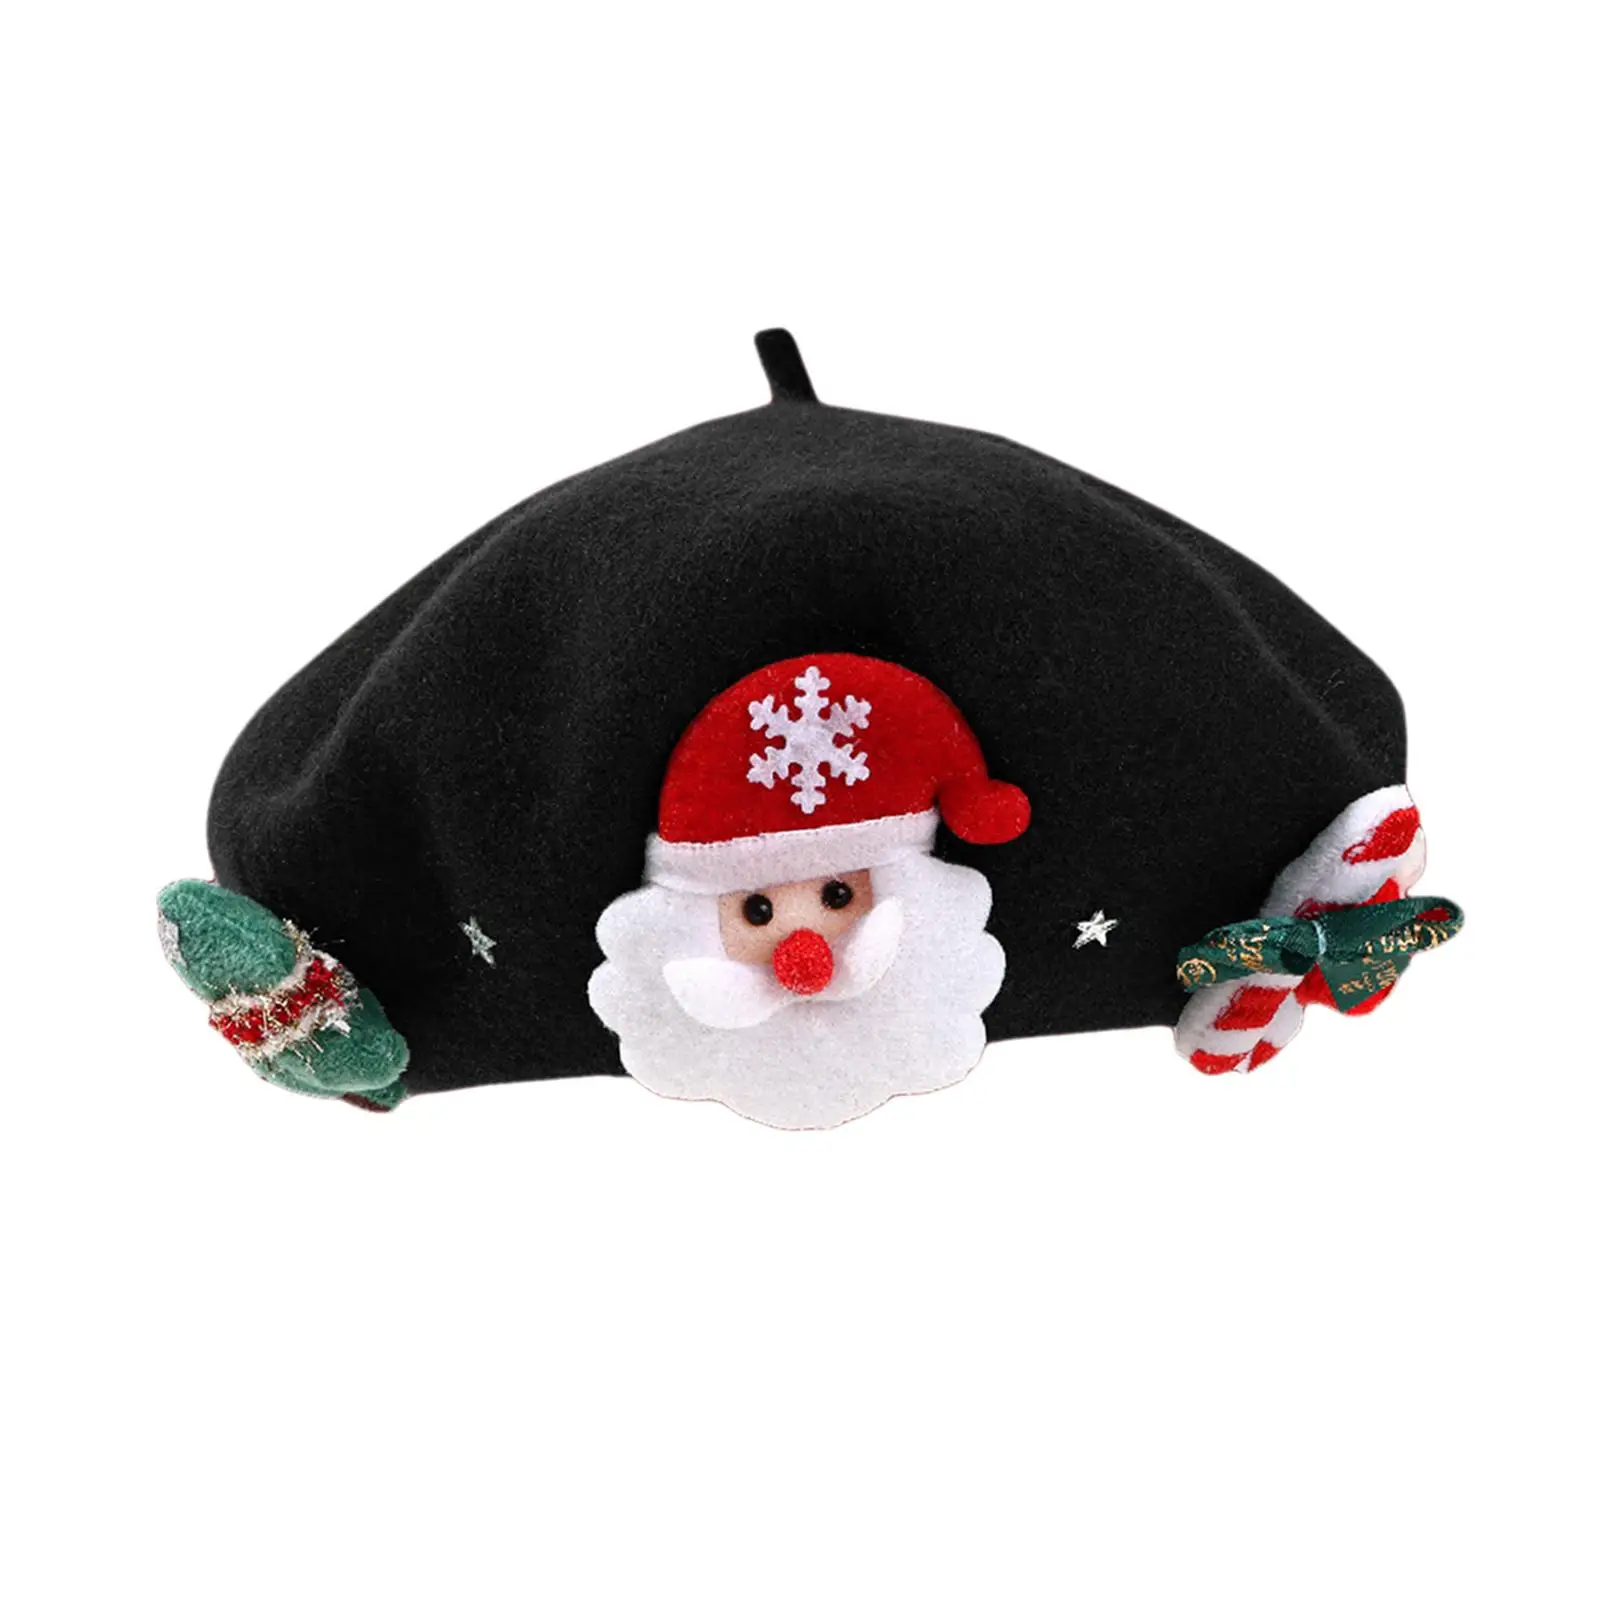 Christmas Beret Hat Beanie Beret Hat Womens French Beret Winter Hat Headwear Warm Elegant Xmas Cap for Adults Girls Vacation